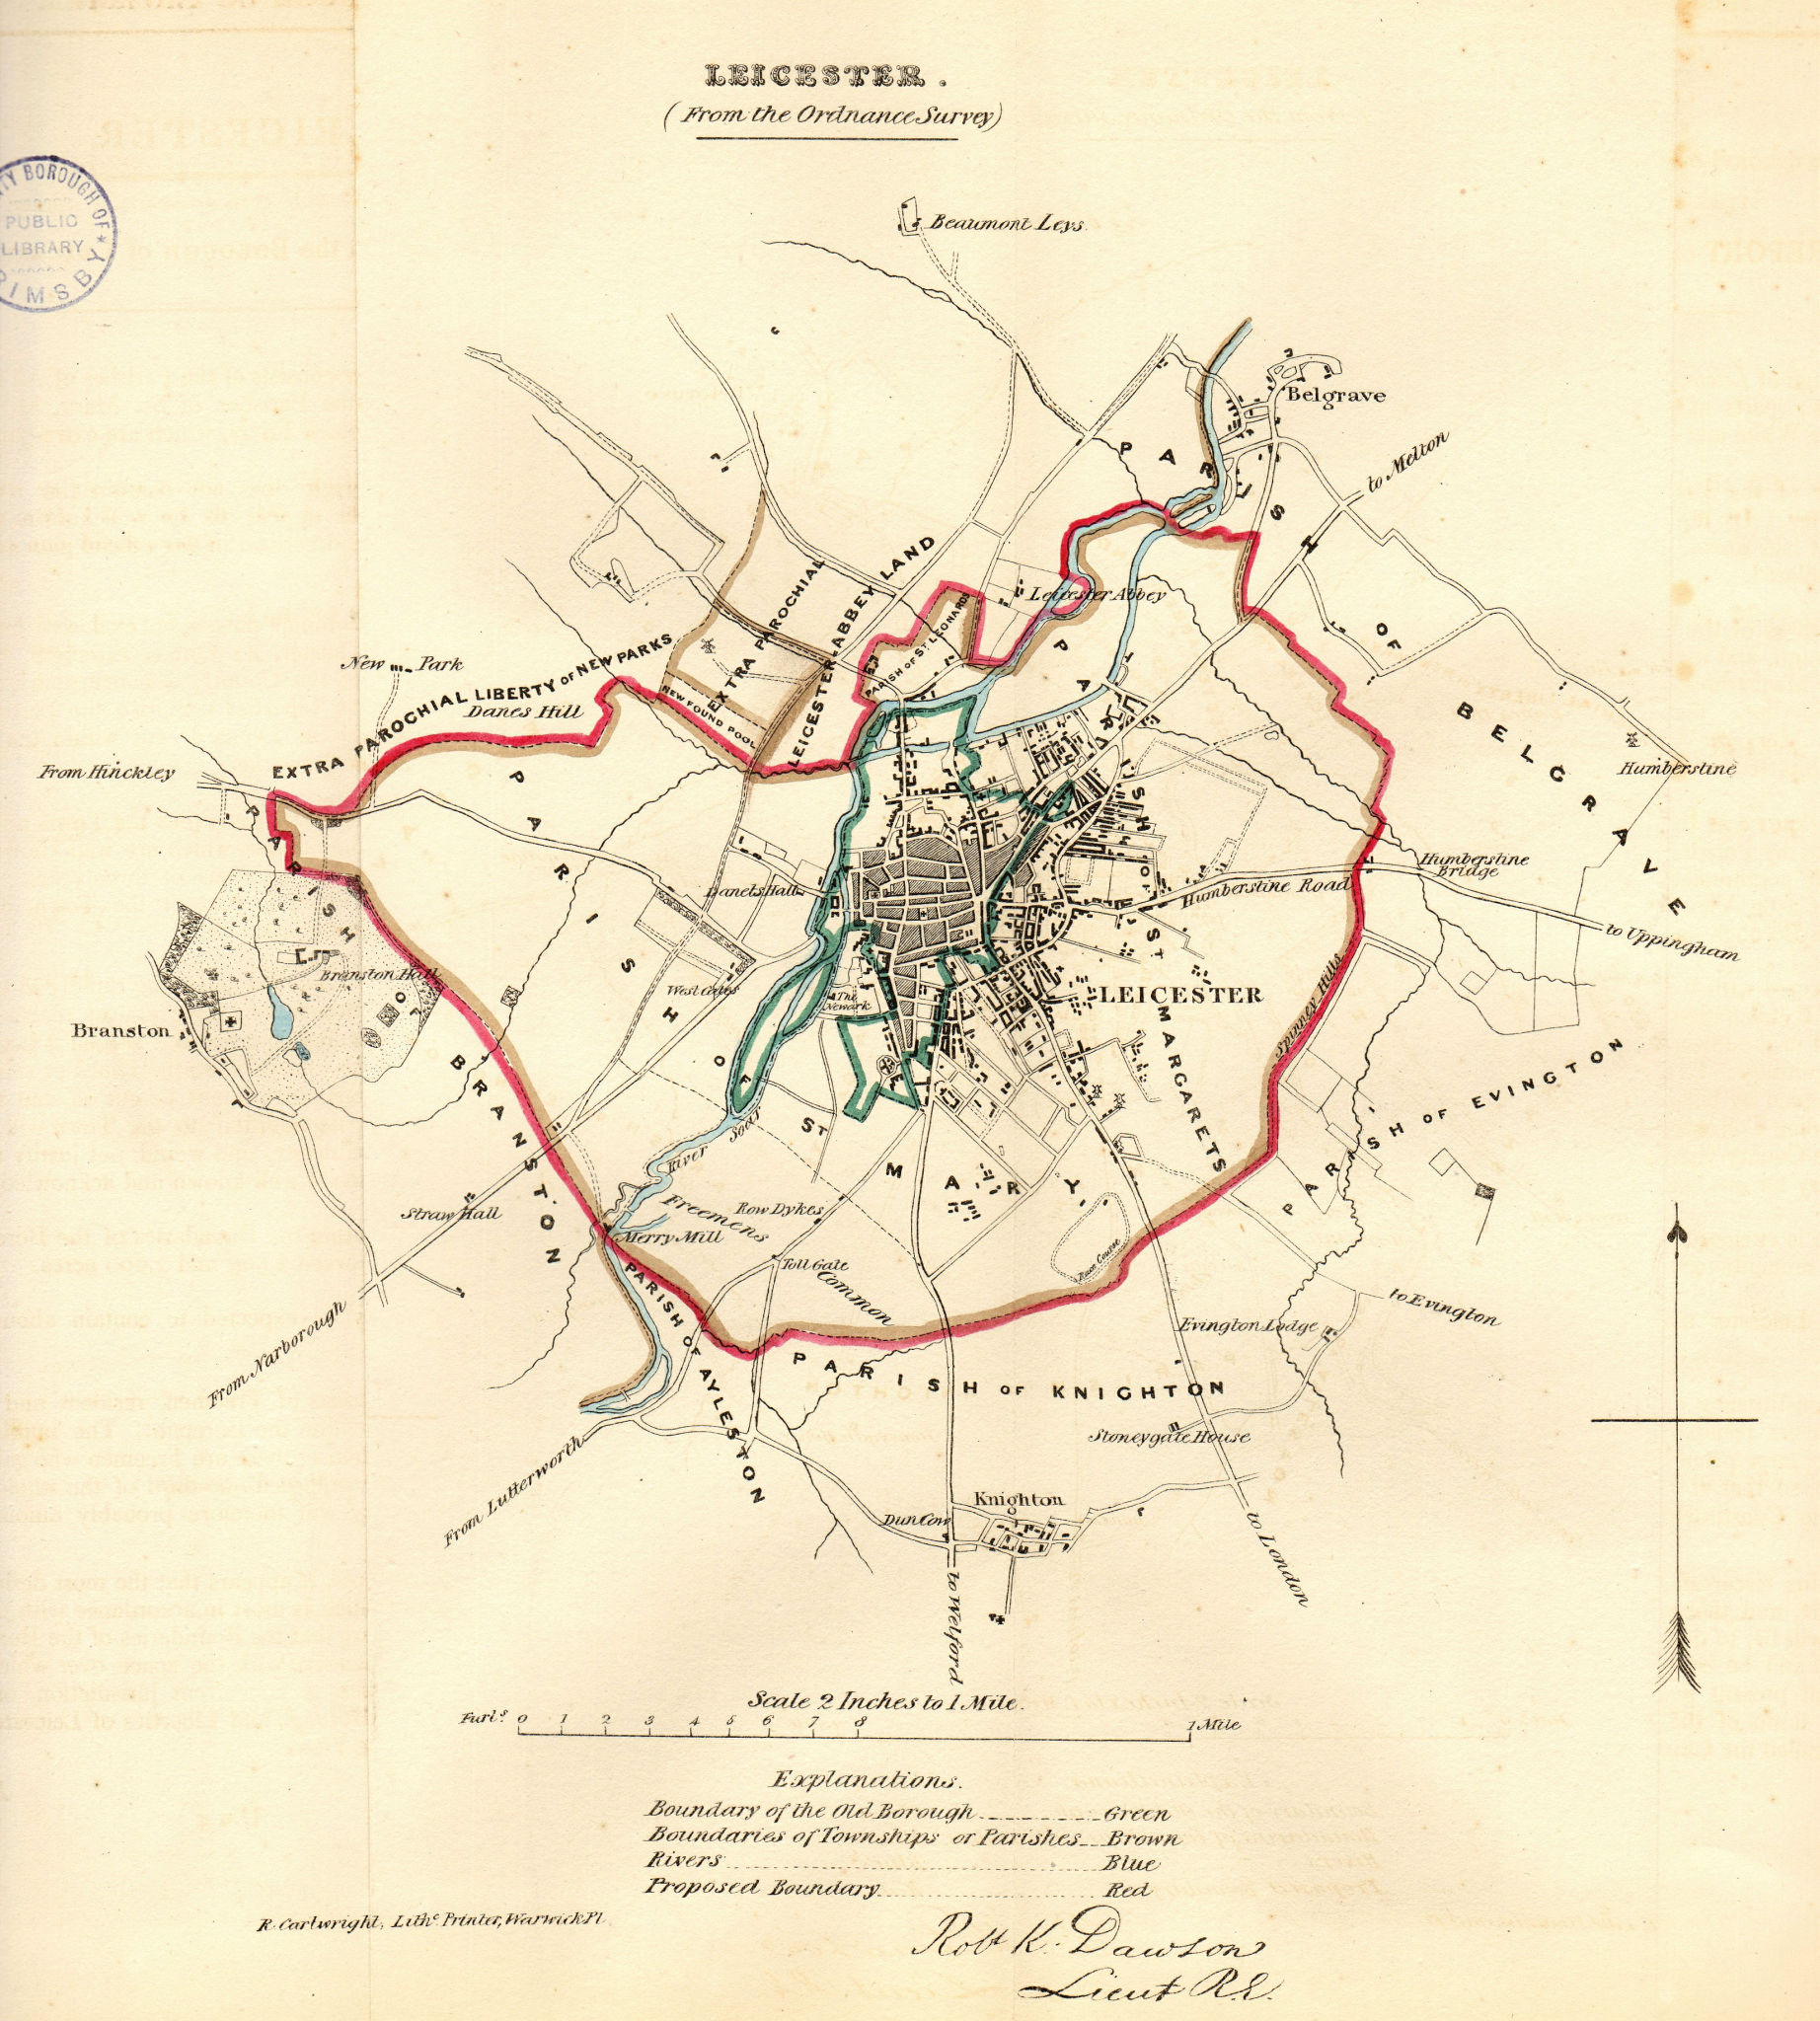 Associate Product LEICESTER borough/town/city plan. REFORM ACT. Leicestershire. DAWSON 1832 map